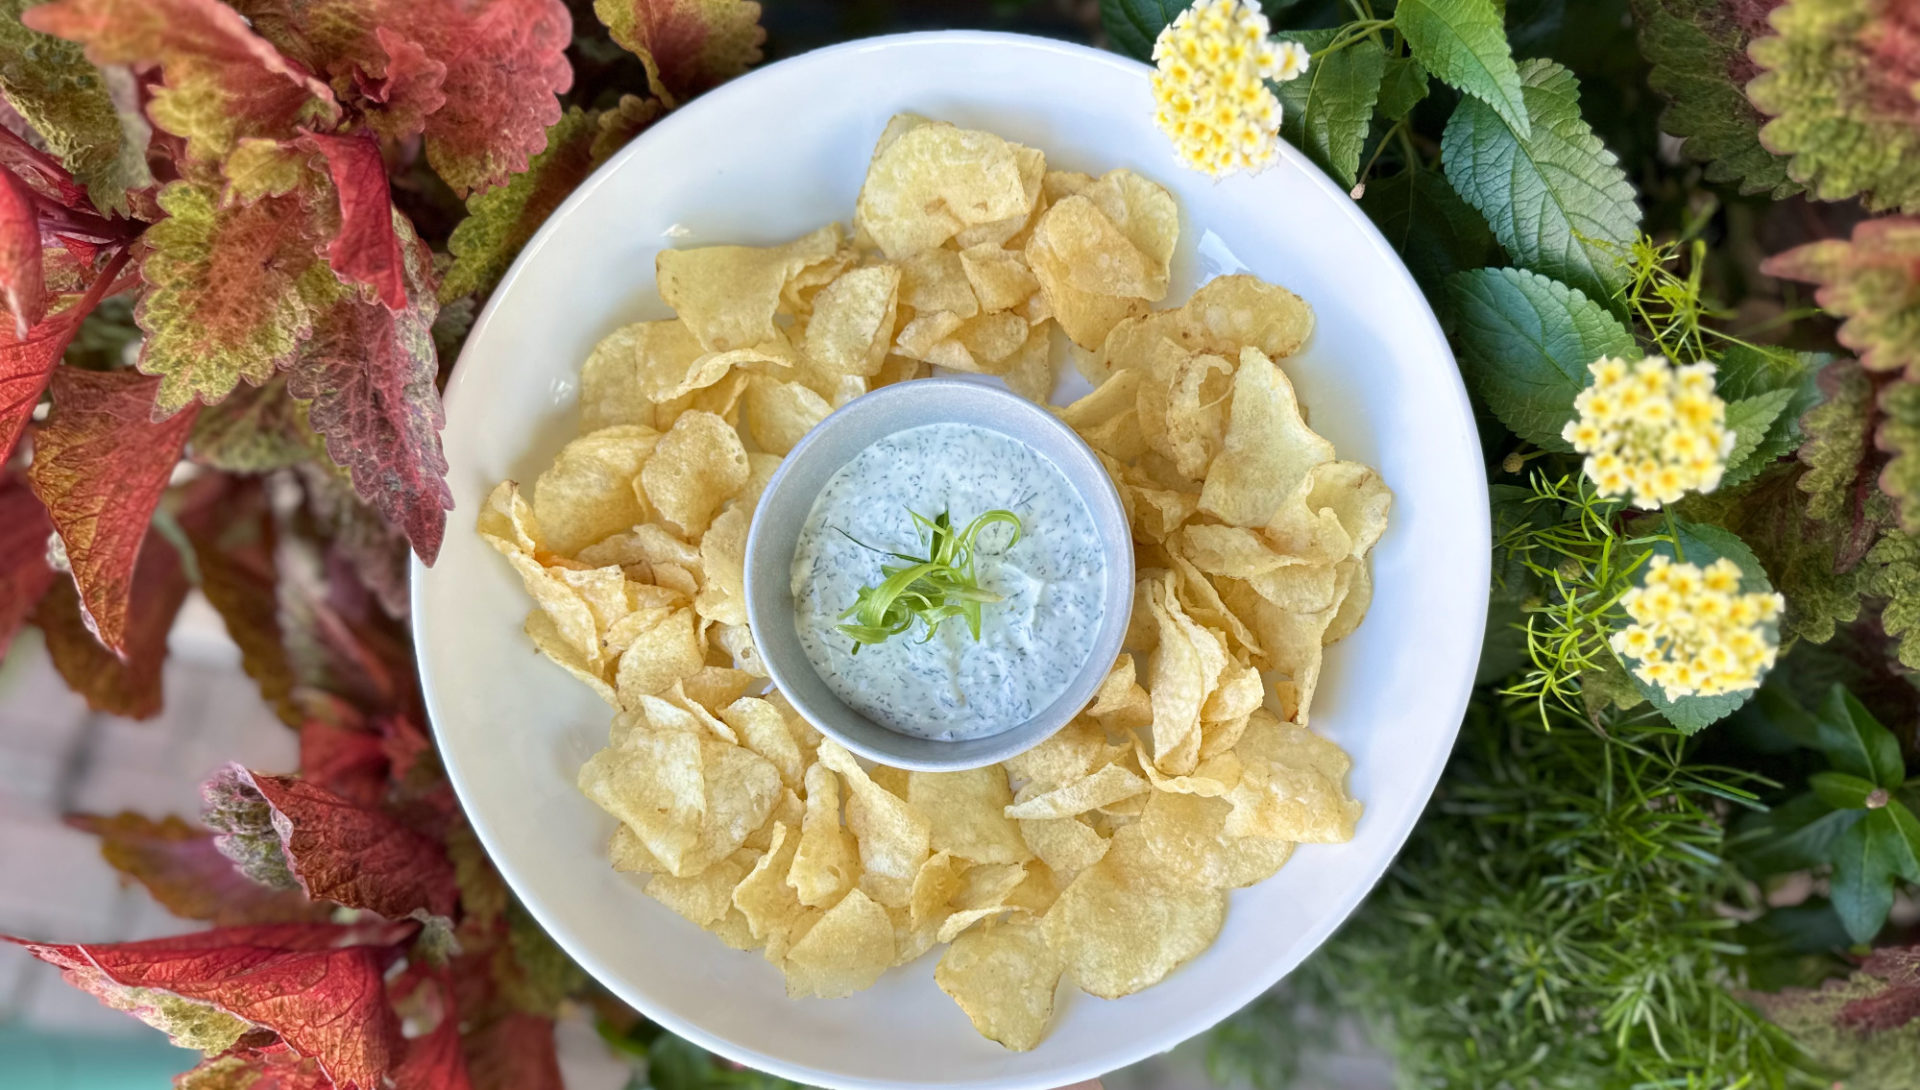 A photo of the dill dip at The Literary Kitchen in Downtown Champaign.